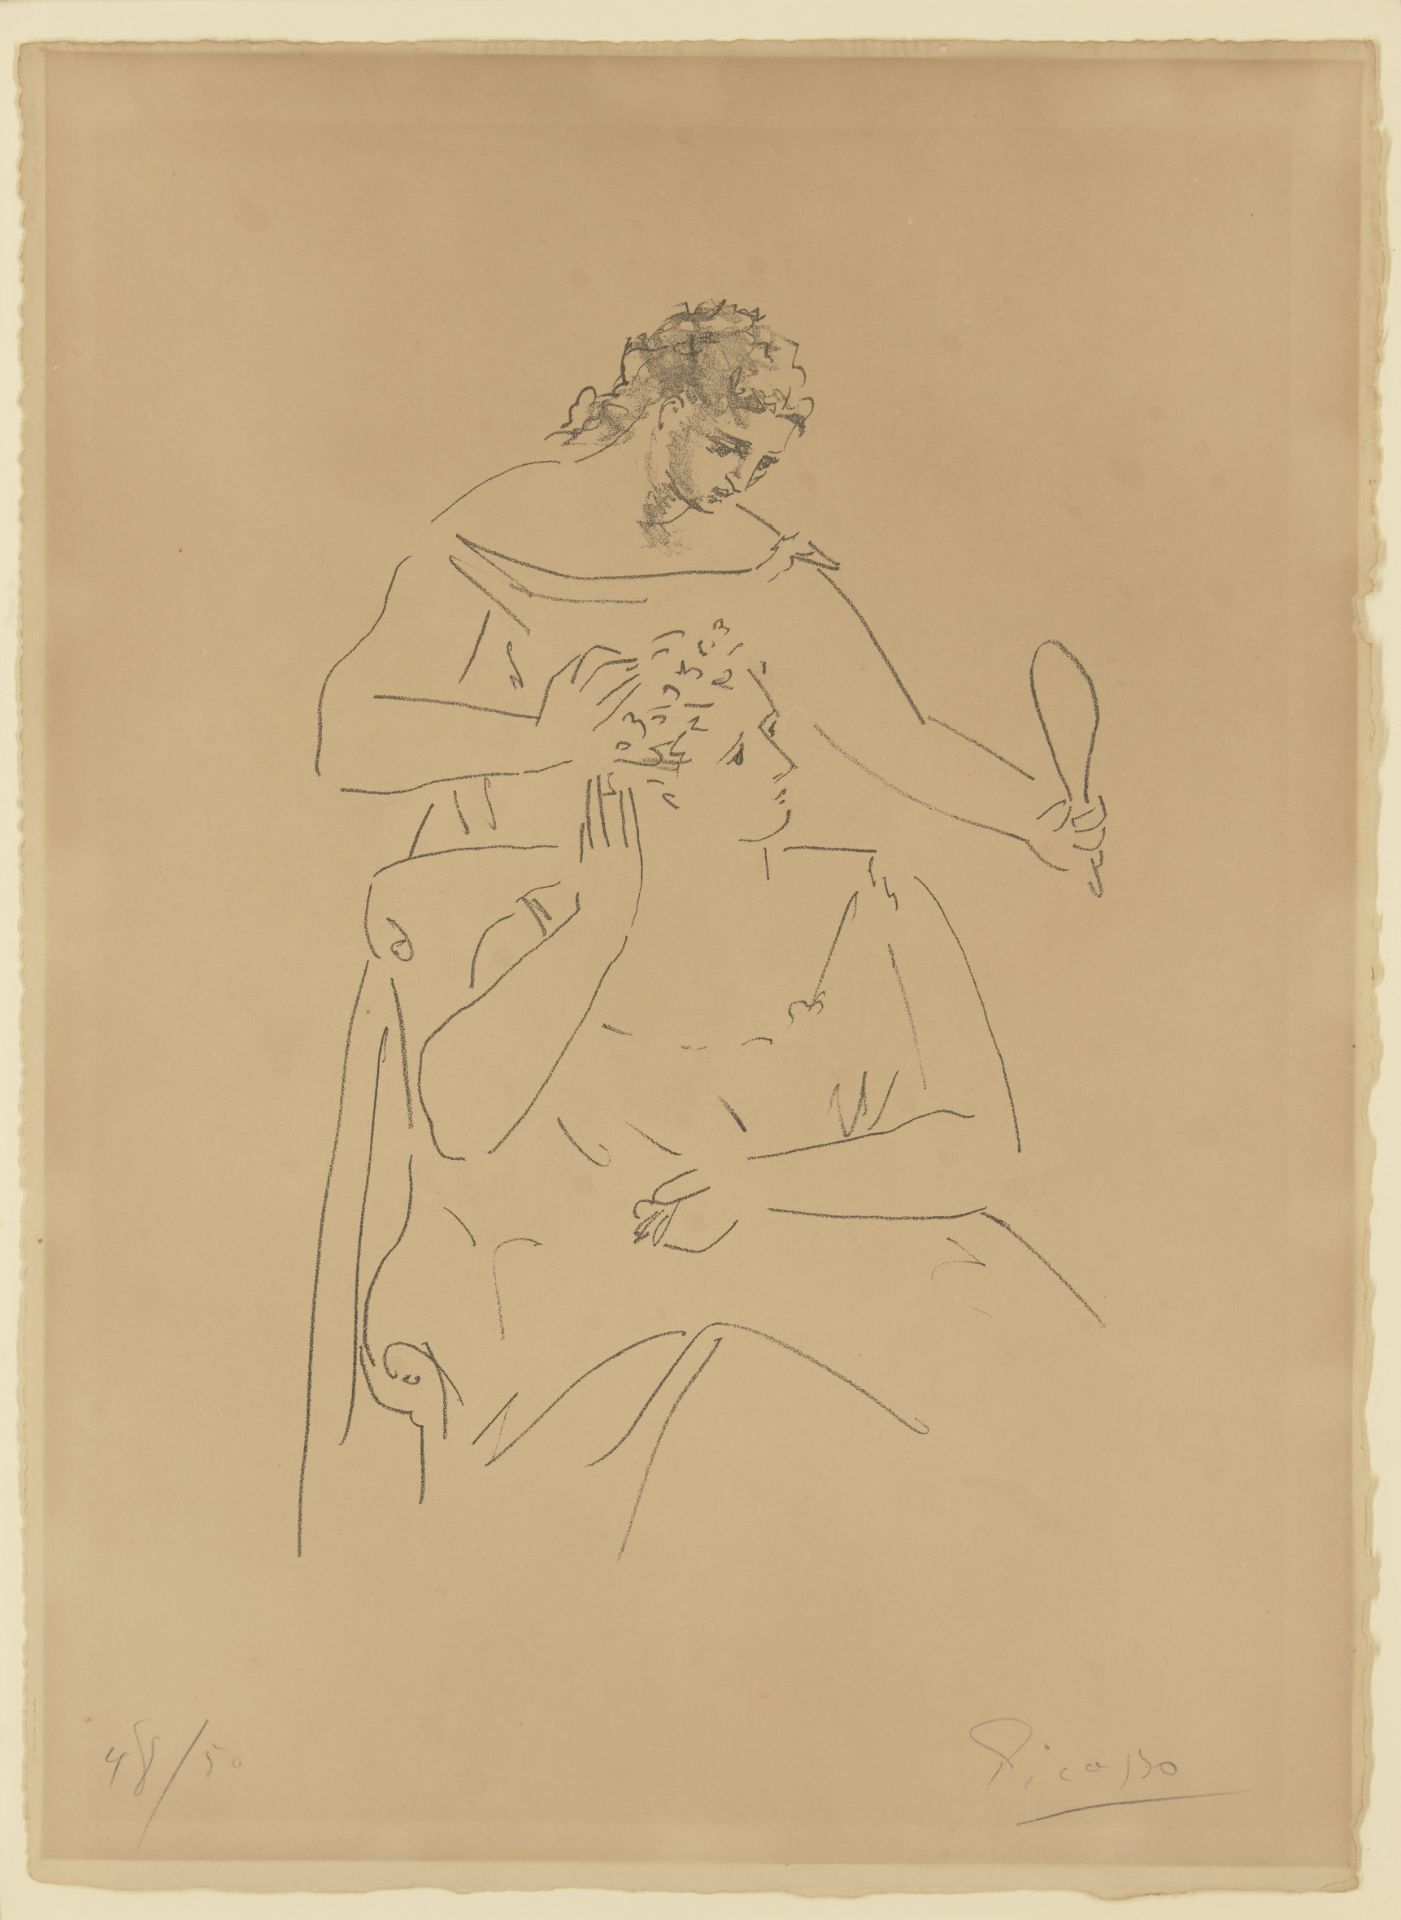 Pablo Picasso, Spanish 1881-1973,  La Coiffure, 1923; lithograph on tinted Van Gelder paper, si...